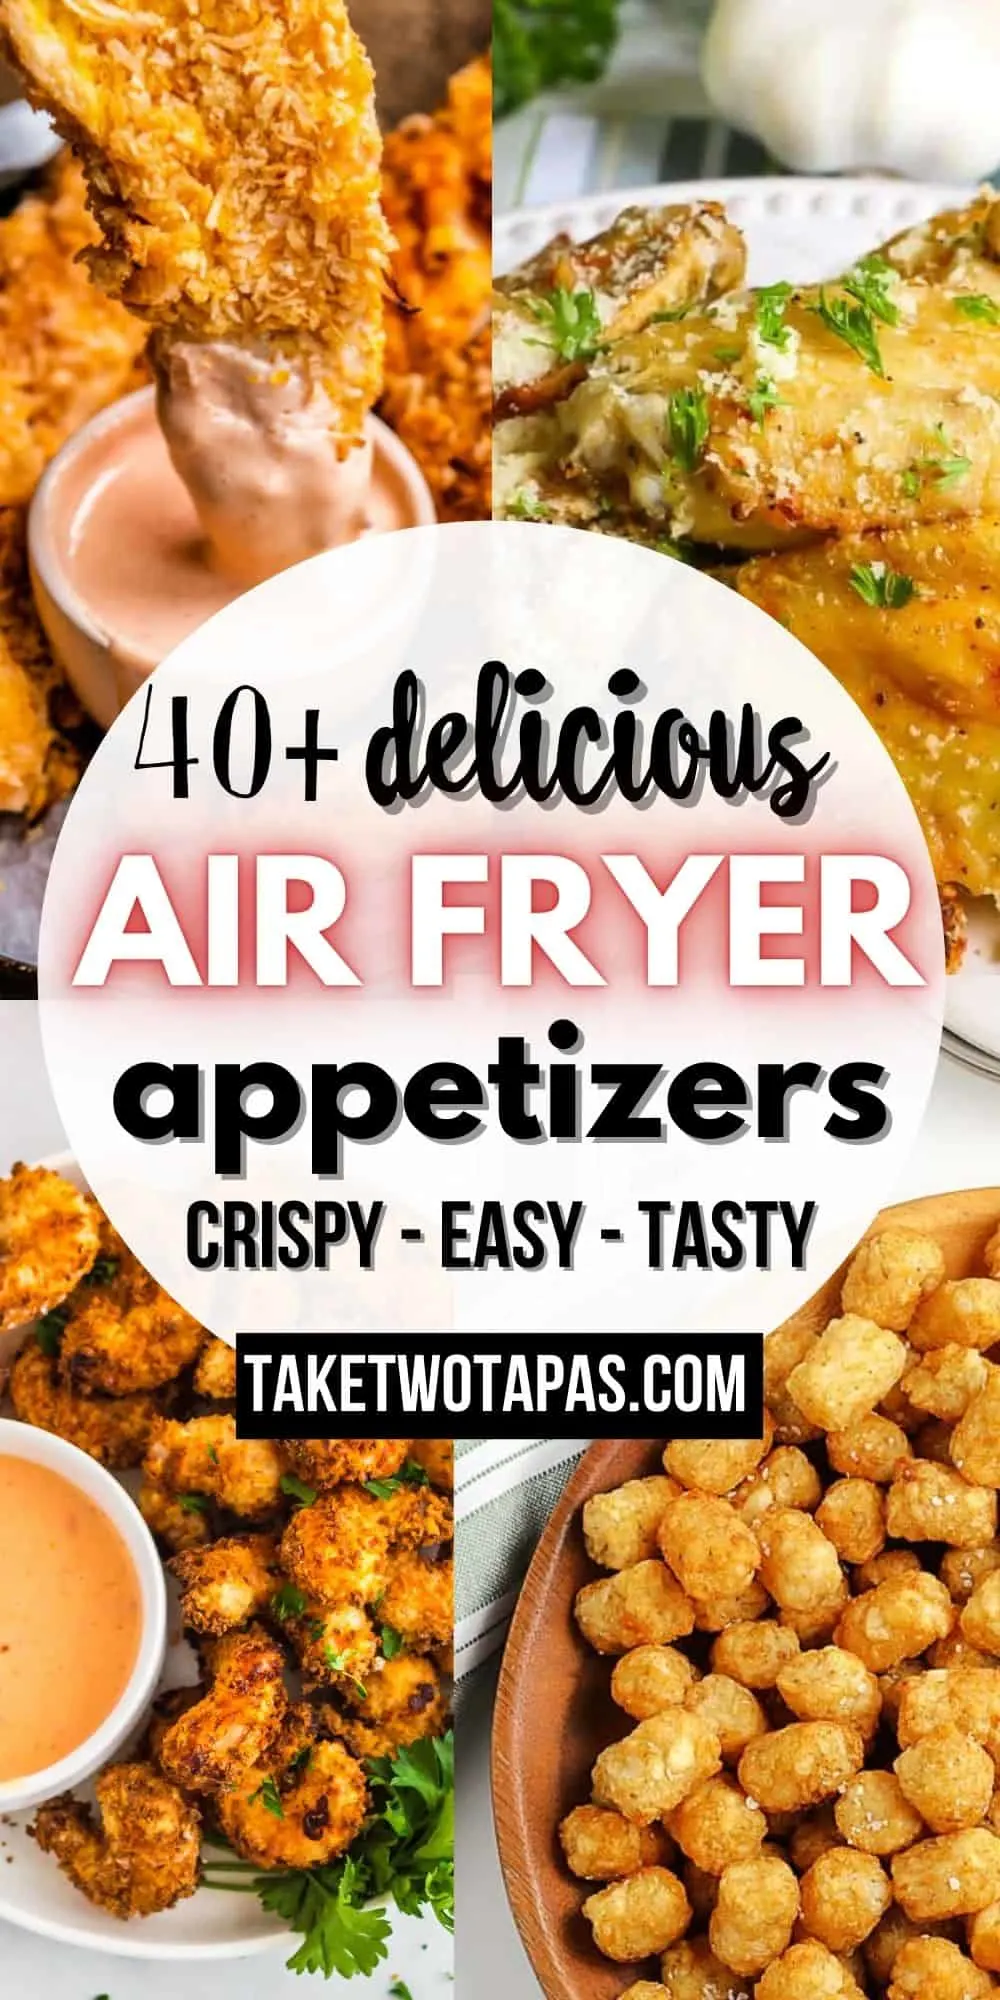 collage with fried shrimp with text "40+ air fryer appetizer recipes"